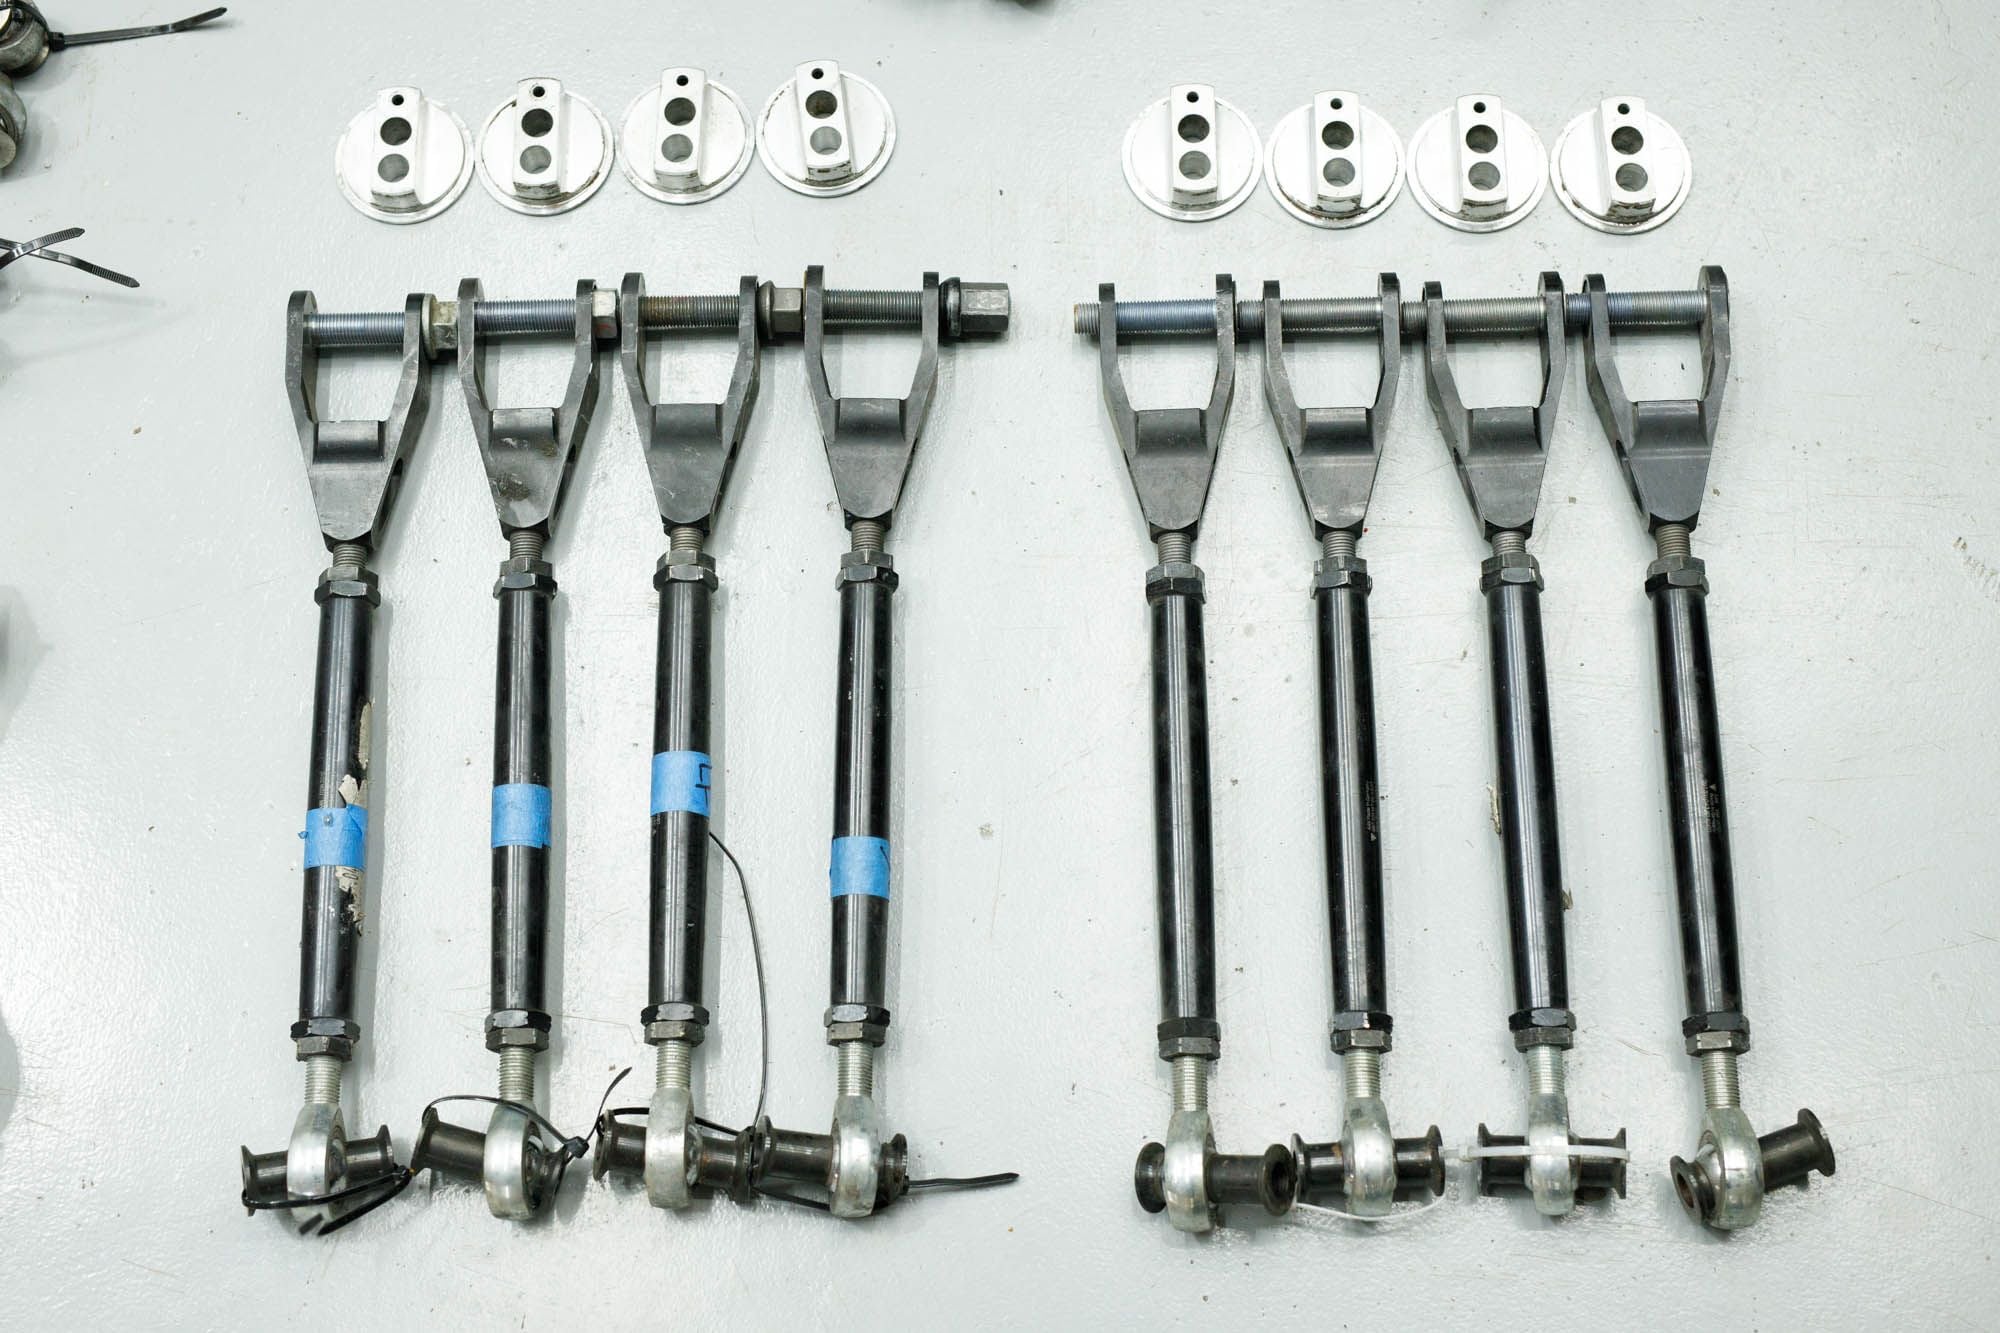 2011 Porsche GT3 - OEM Adjustable Thrust Arms w/Adjustable Caster Bushings - 2 SETS - Accessories - $600 - Charlotte, NC 28036, United States